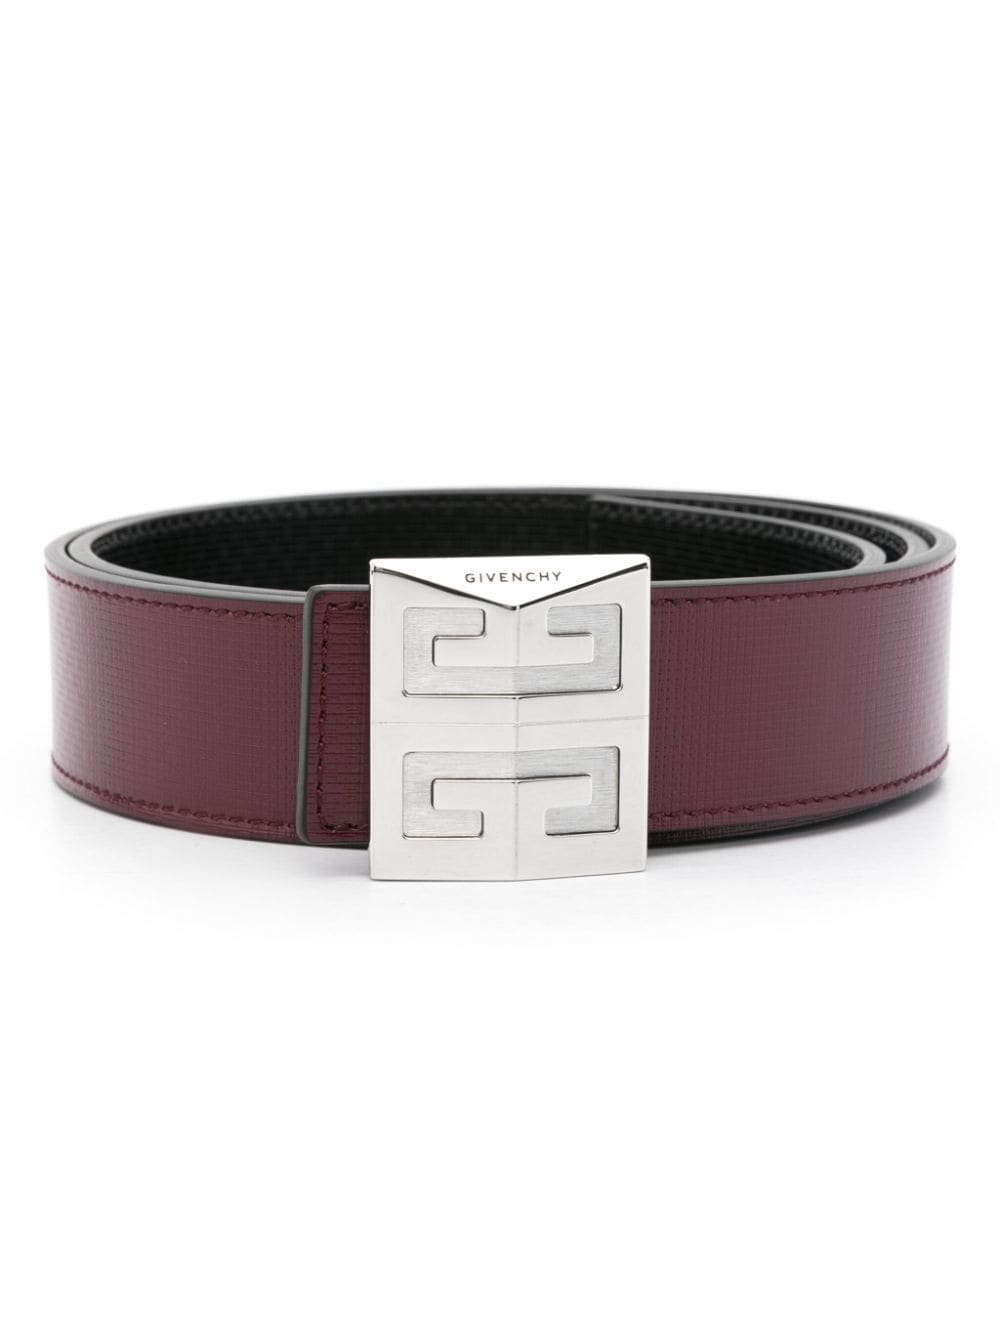 Givenchy 4G reversible leather belt - Red von Givenchy